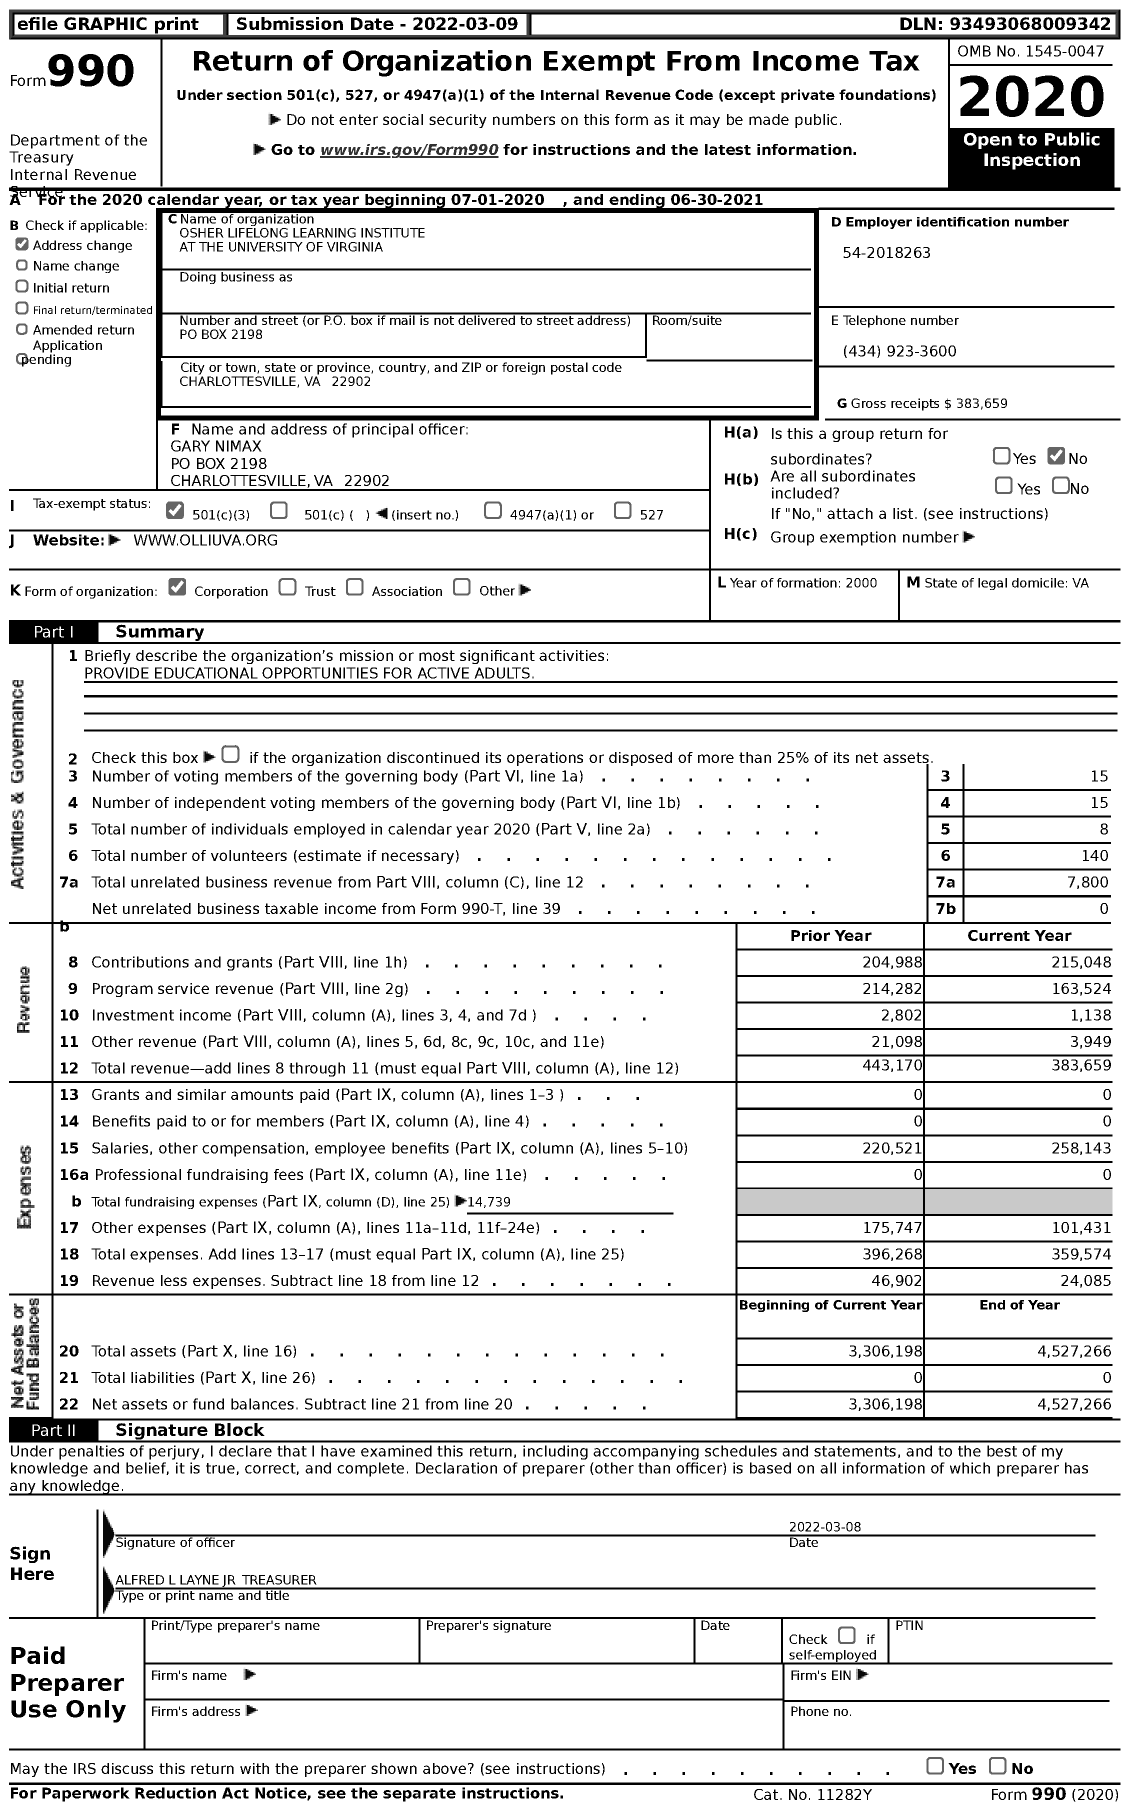 Image of first page of 2020 Form 990 for Osher Lifelong Learning Institute at the University of Virginia